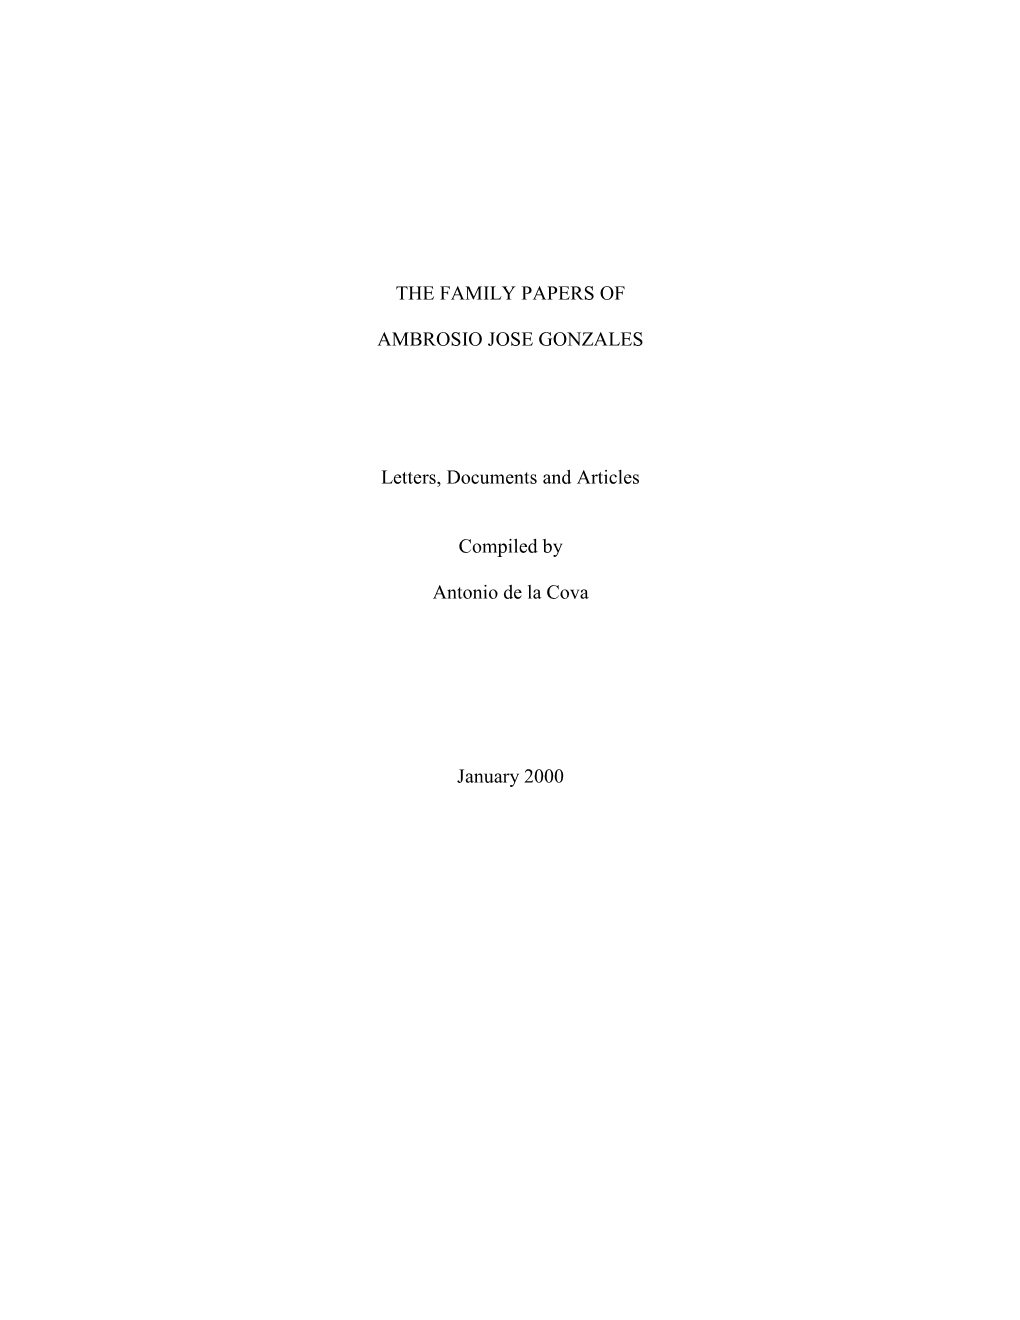 THE FAMILY PAPERS of AMBROSIO JOSE GONZALES Letters